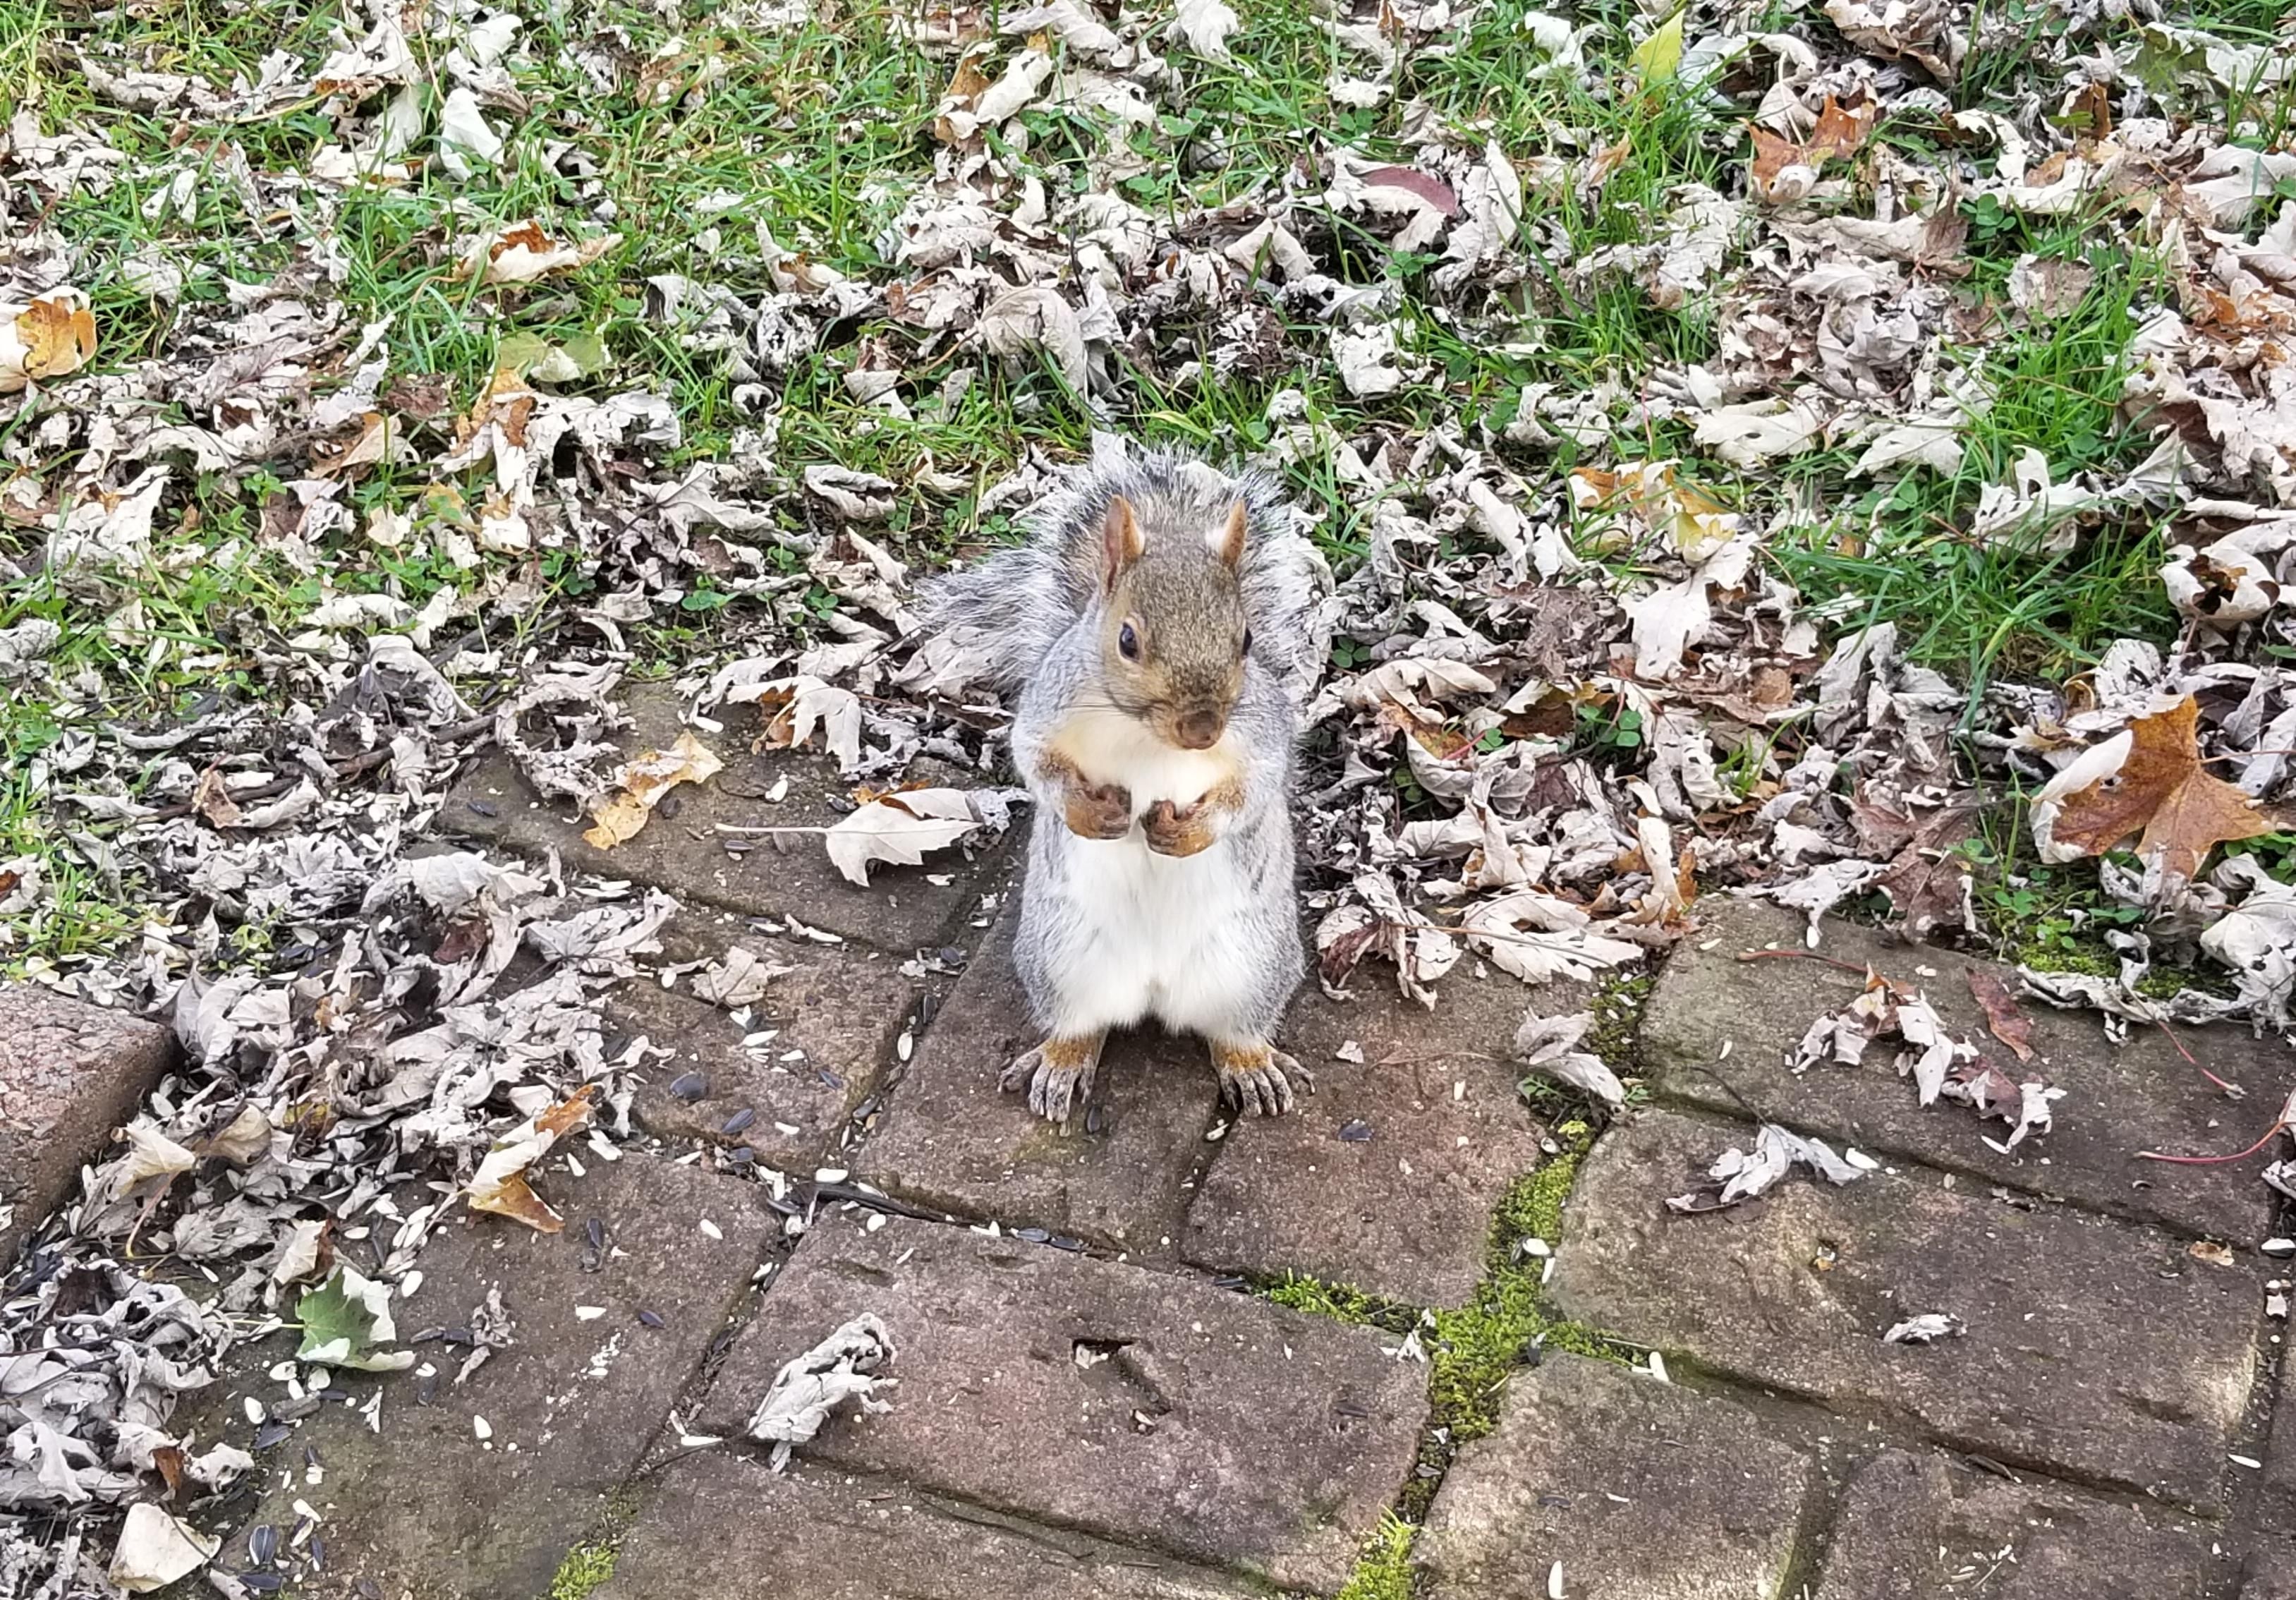 So almost every day for the last two weeks, this one squirrel just comes to the door and rubs its nipples